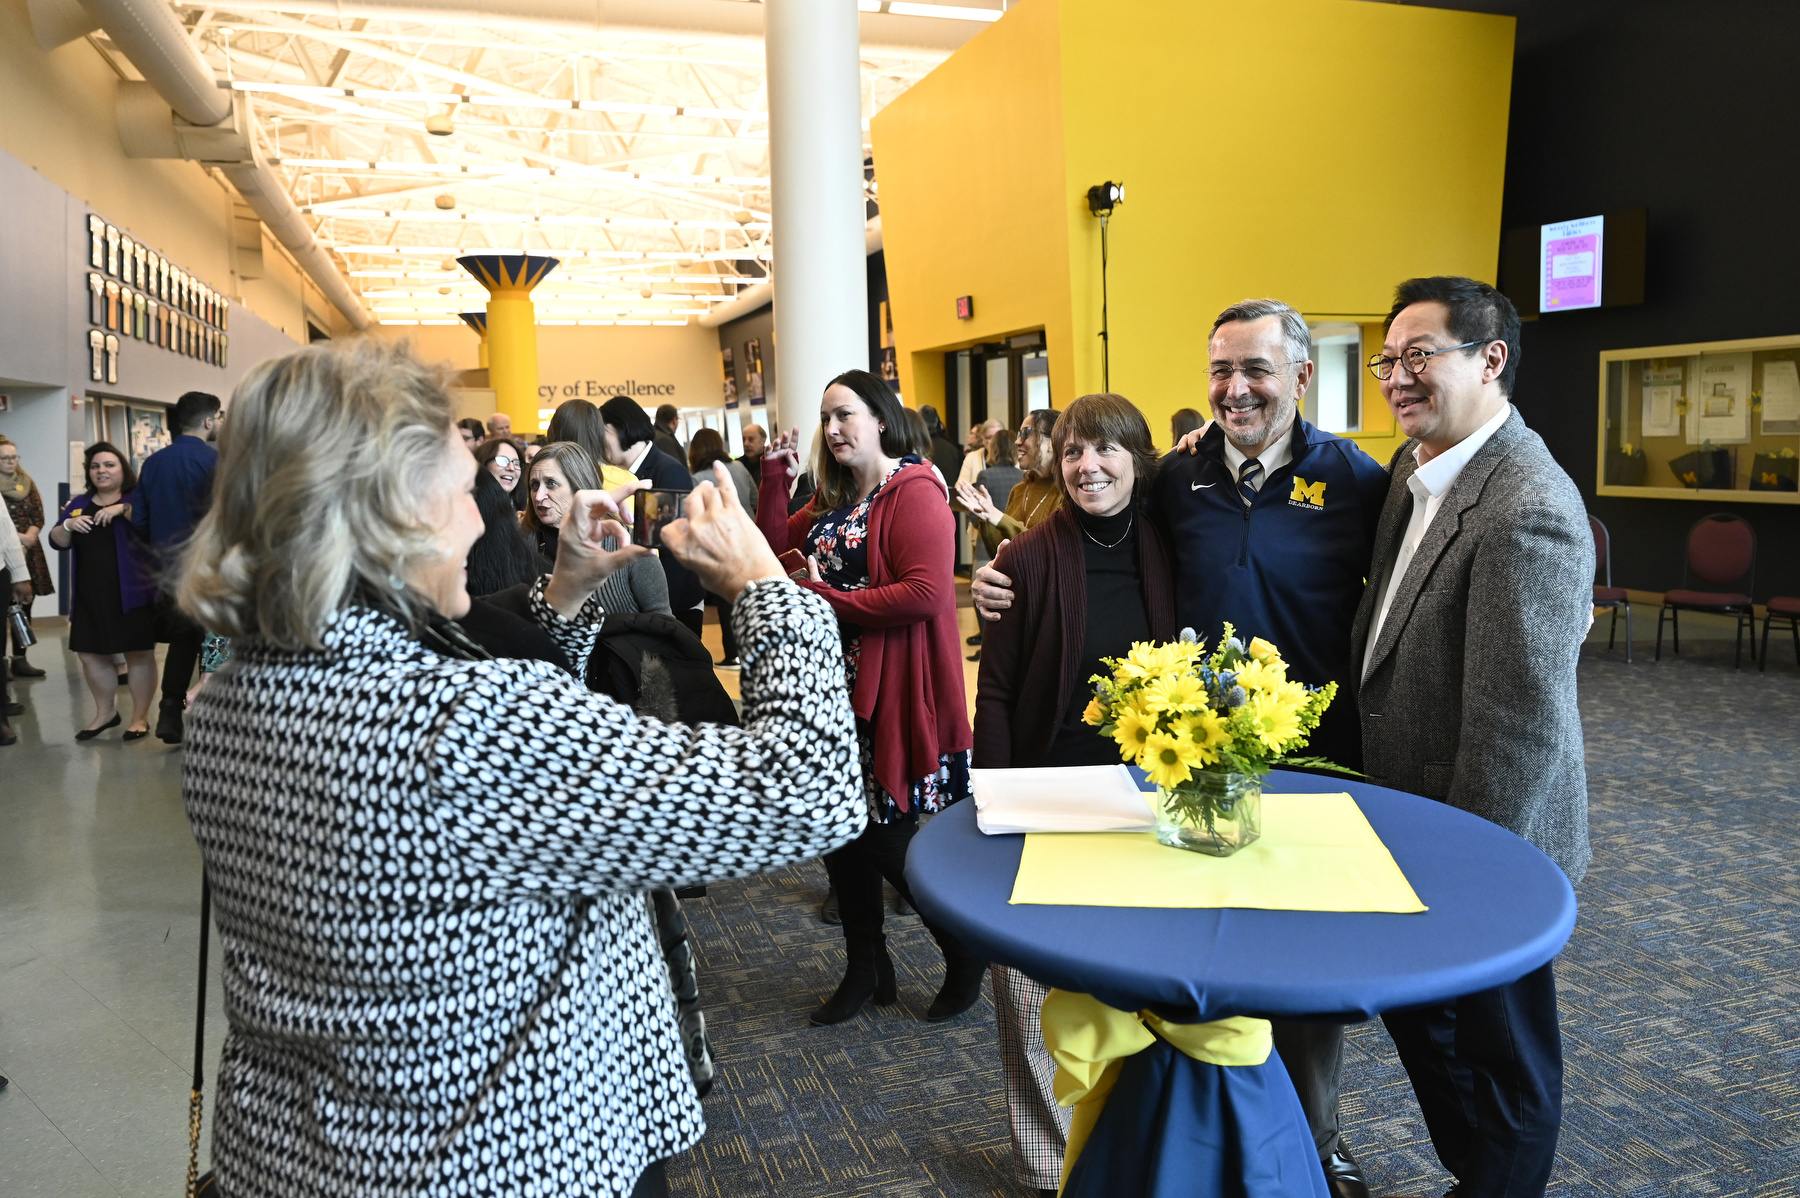 Susan Grasso, Chancellor Domenico Grasso and U-M President Santa Ono pose for a photo while hundreds of people mingle in the background at a reception in the University Center.